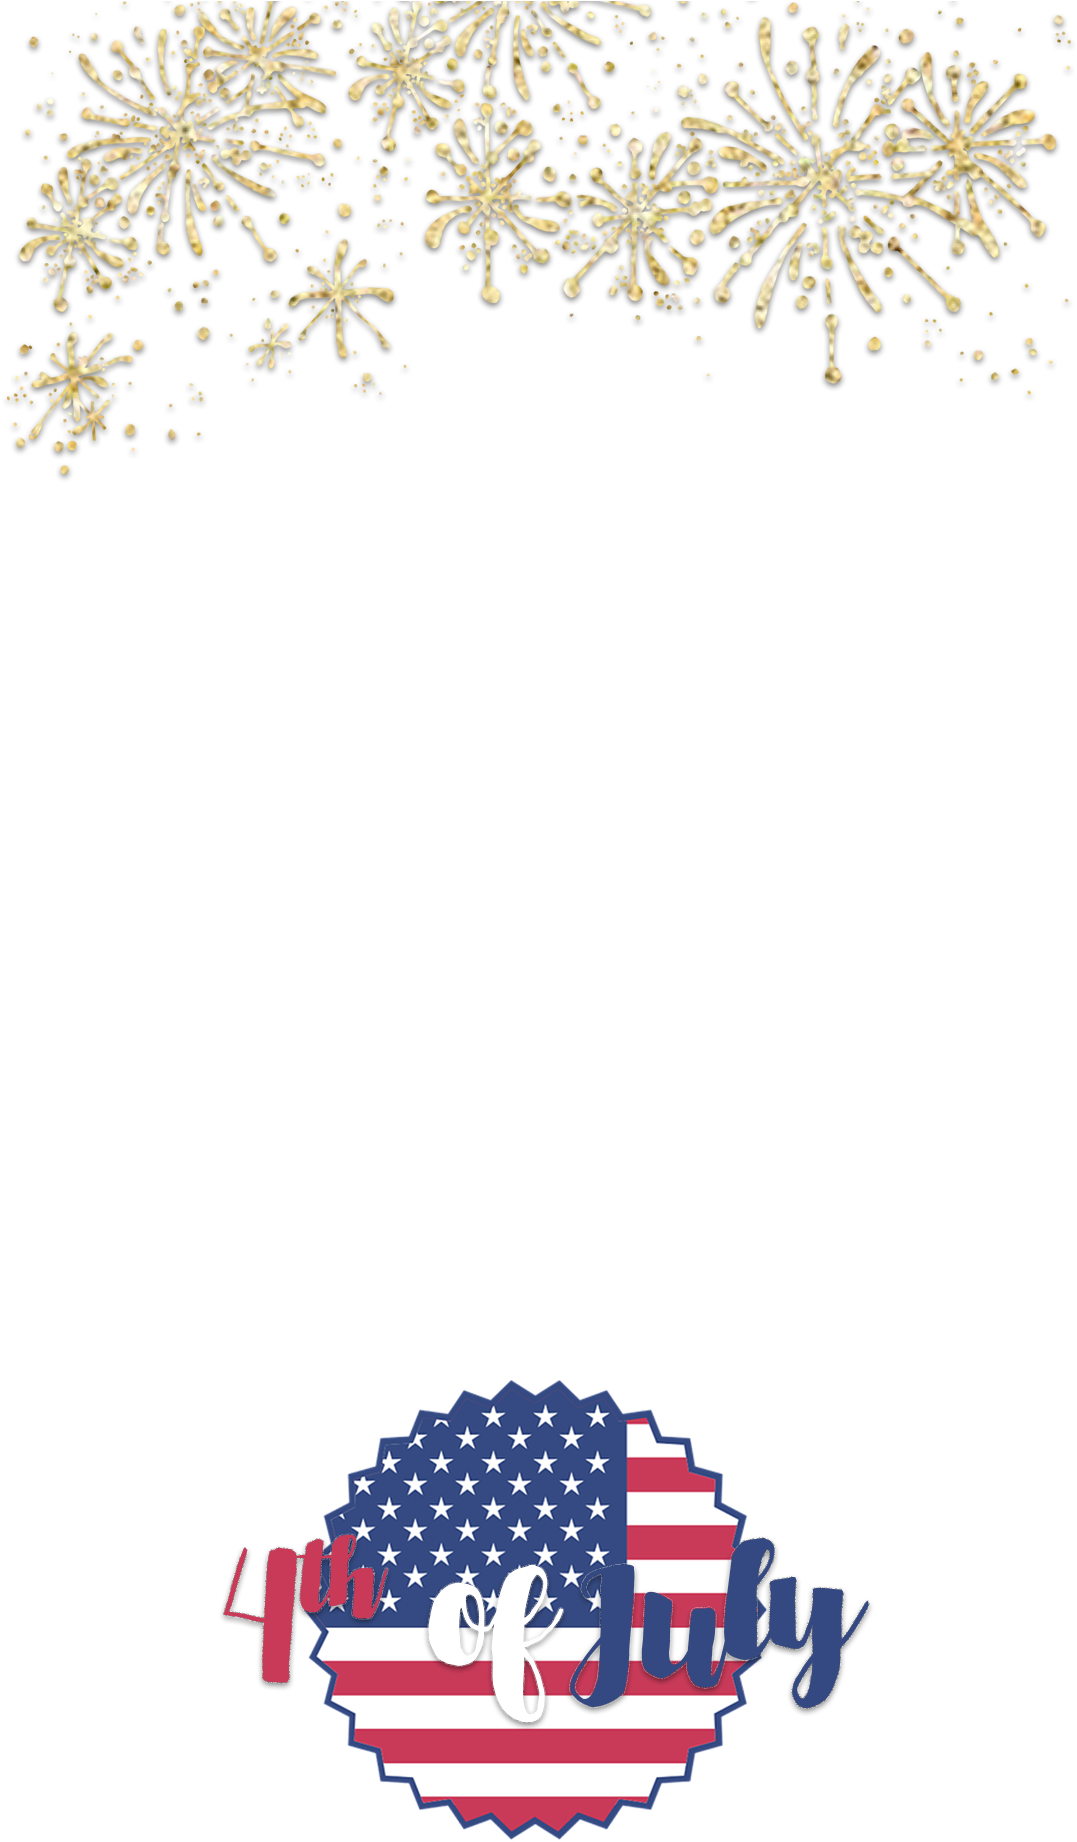 4thof July Fireworksand Flag Graphic PNG